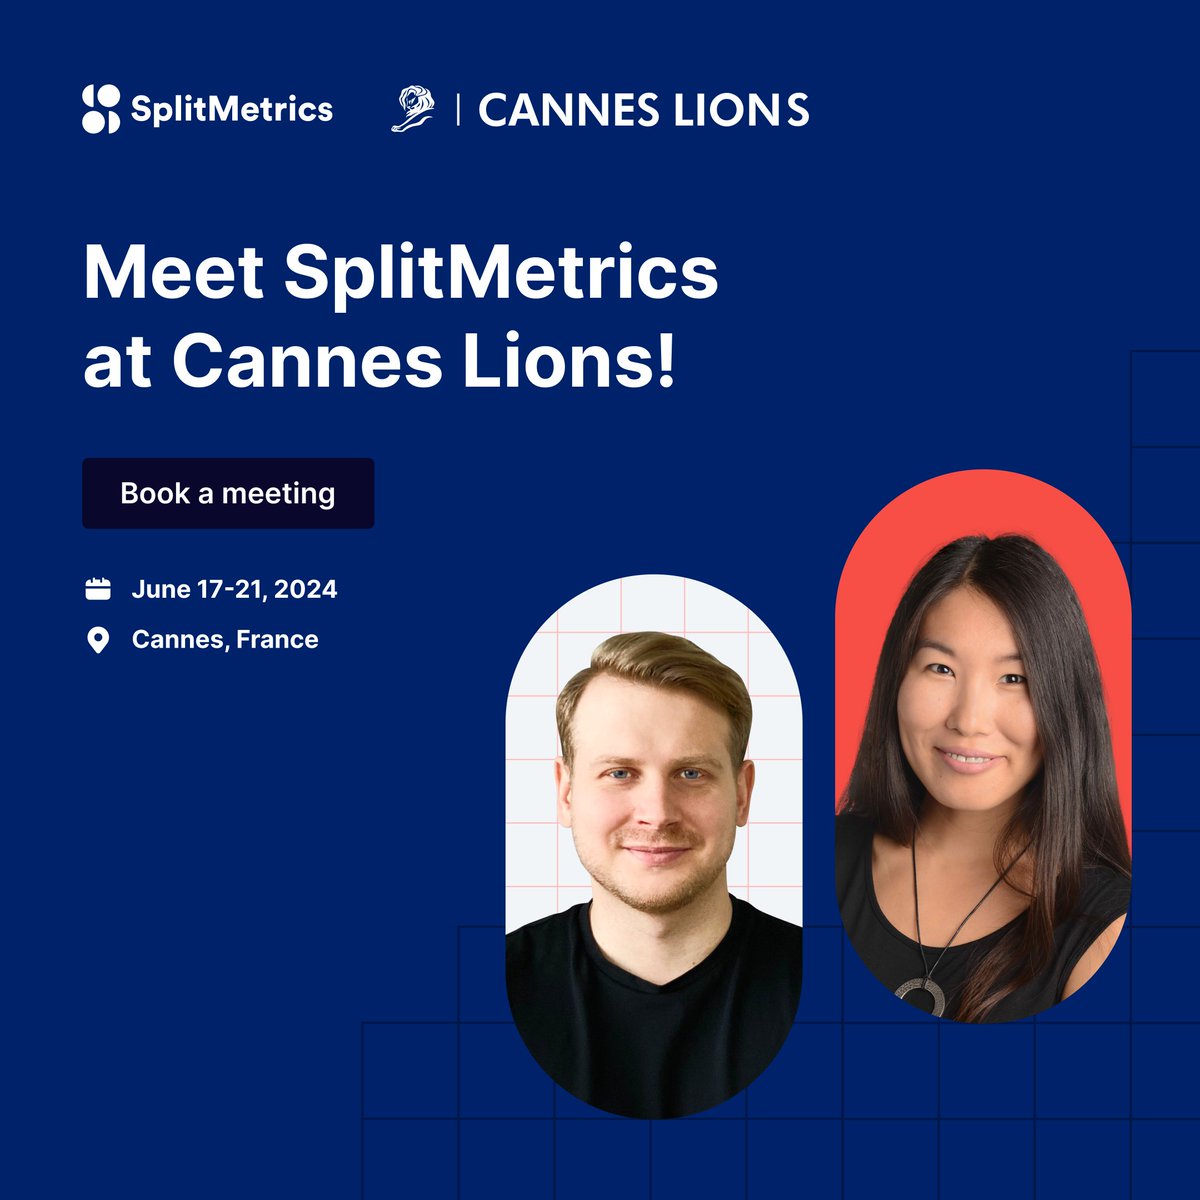 🔥 Big events ignite bright ideas! Meet our CEO and CRO at the Cannes Lions 2024 Festival, 7–21 June 🇫🇷. Contact us here: splitmetrics.com/contact/

#appgrowth #mobilegamegrowth #mobilemarketing #appmarketing #mobileadvertising